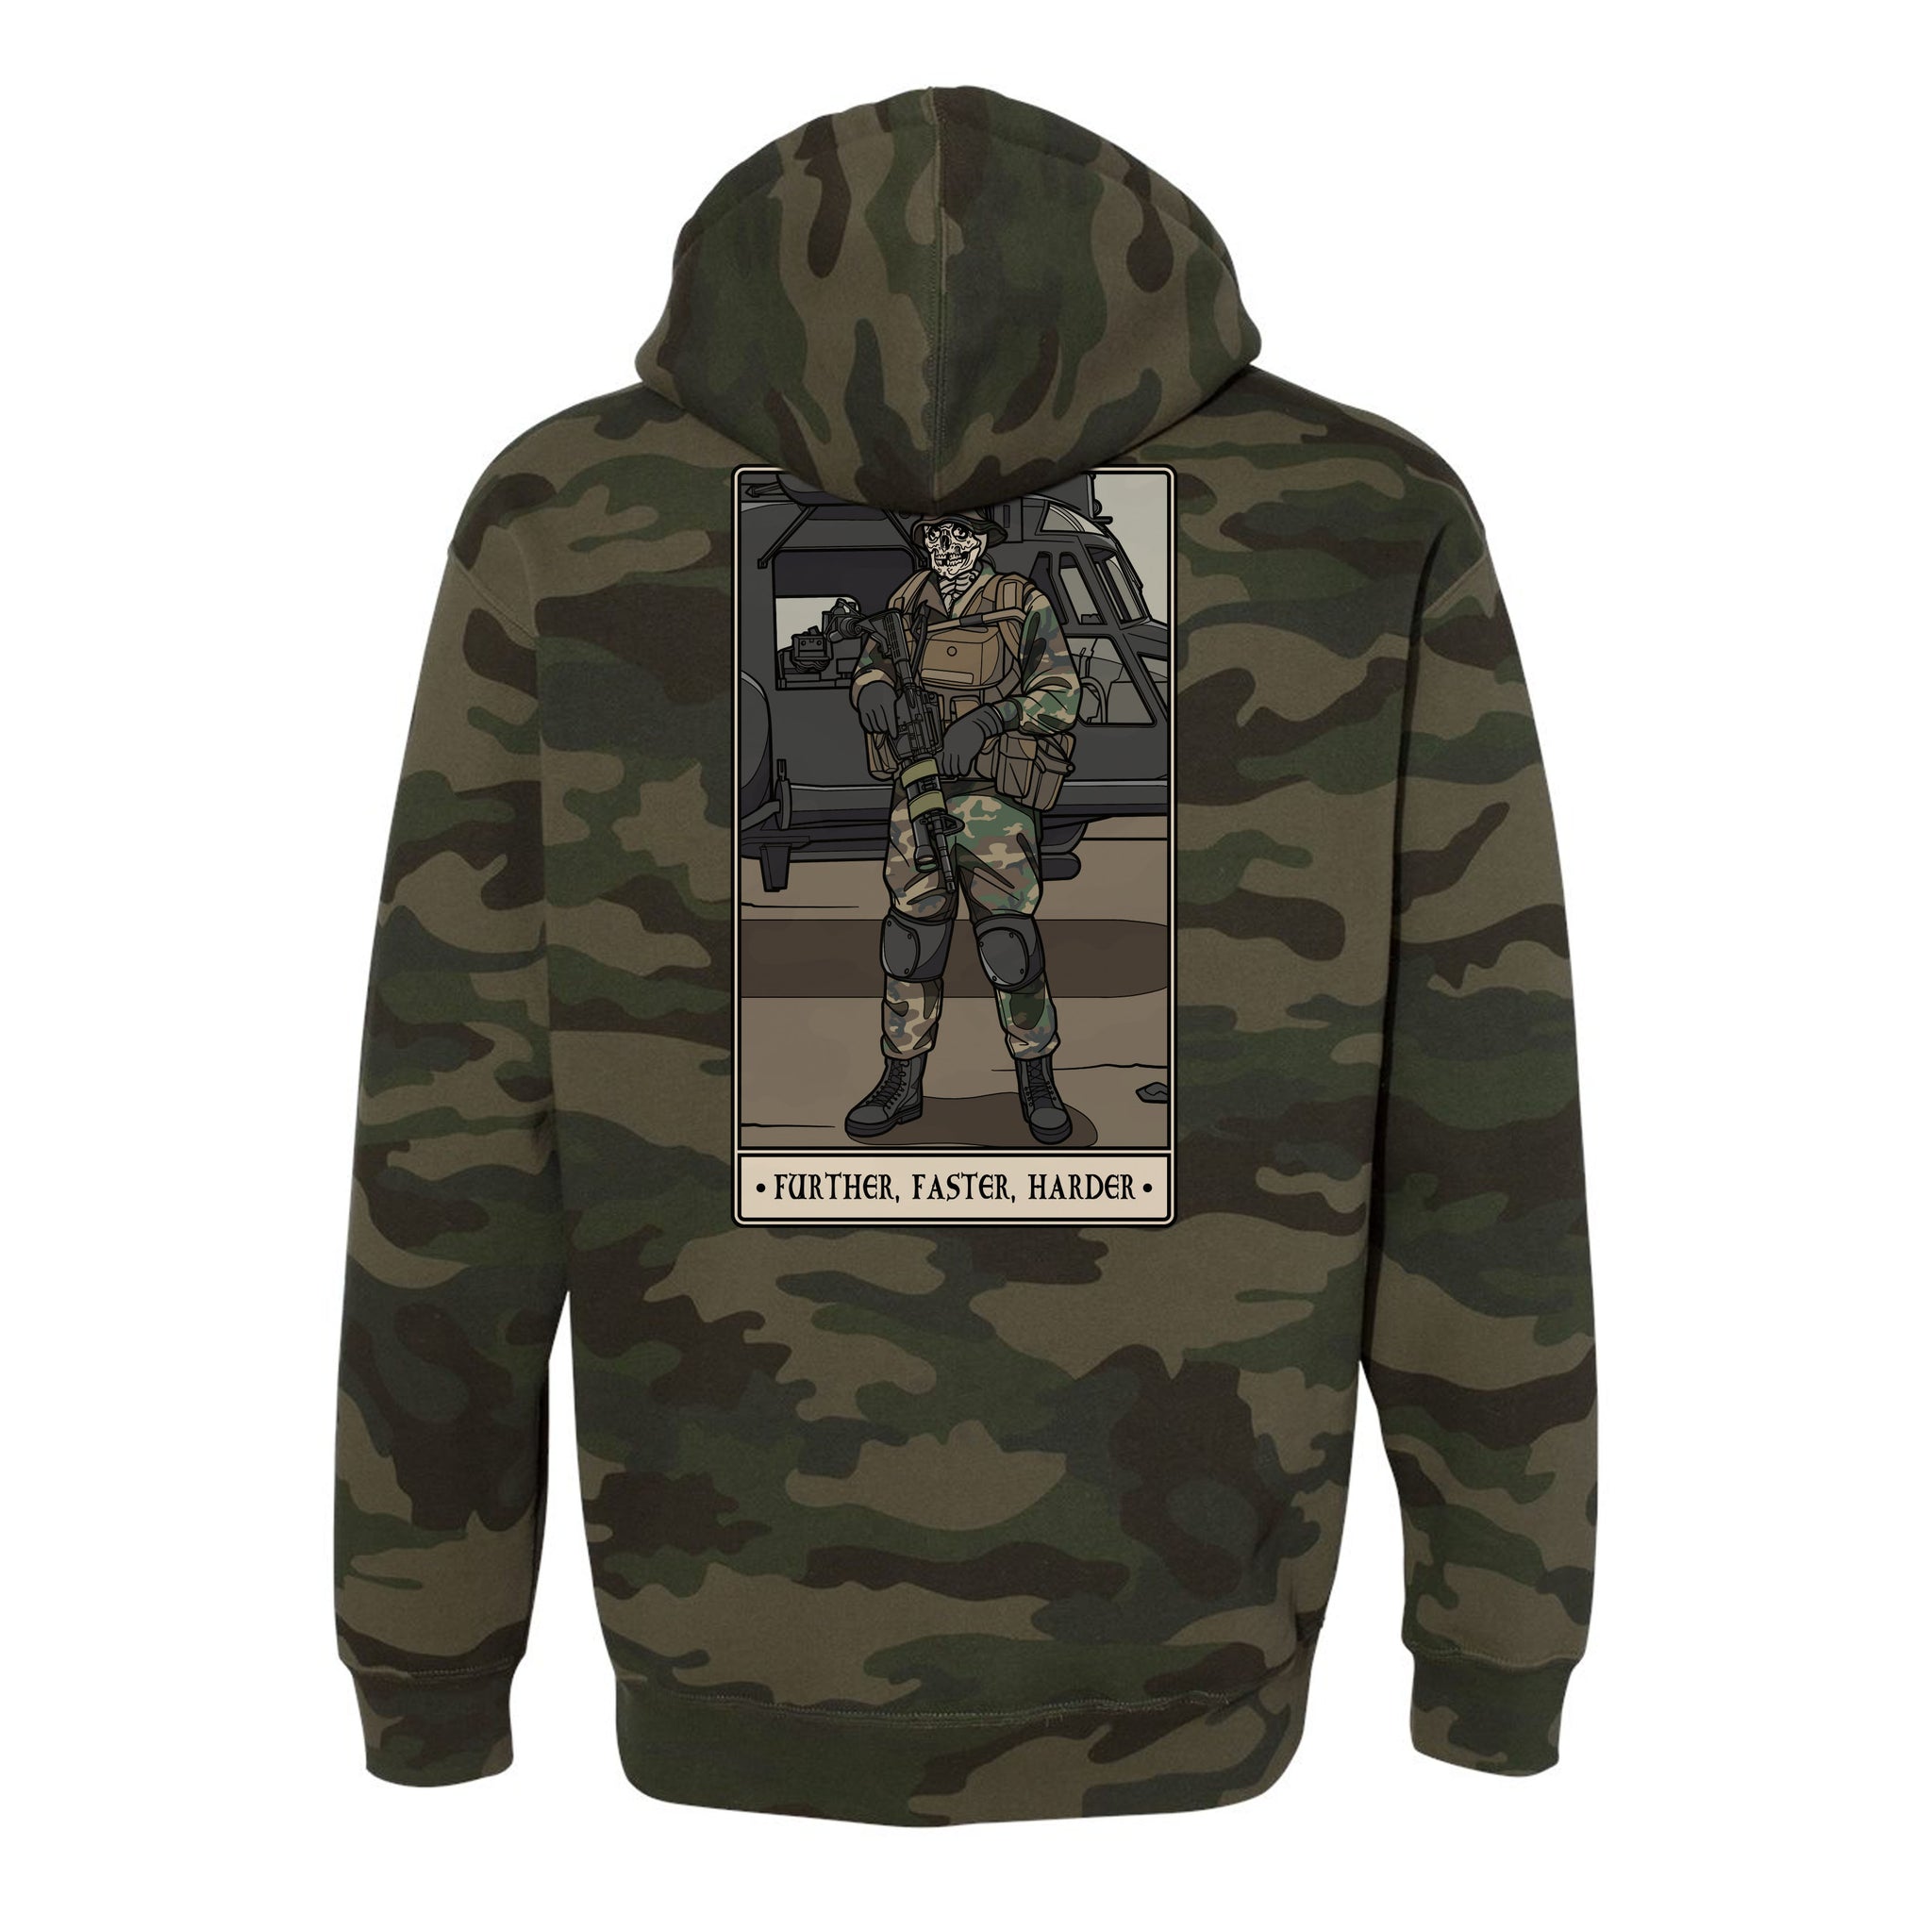 Further Faster Harder Hoodie